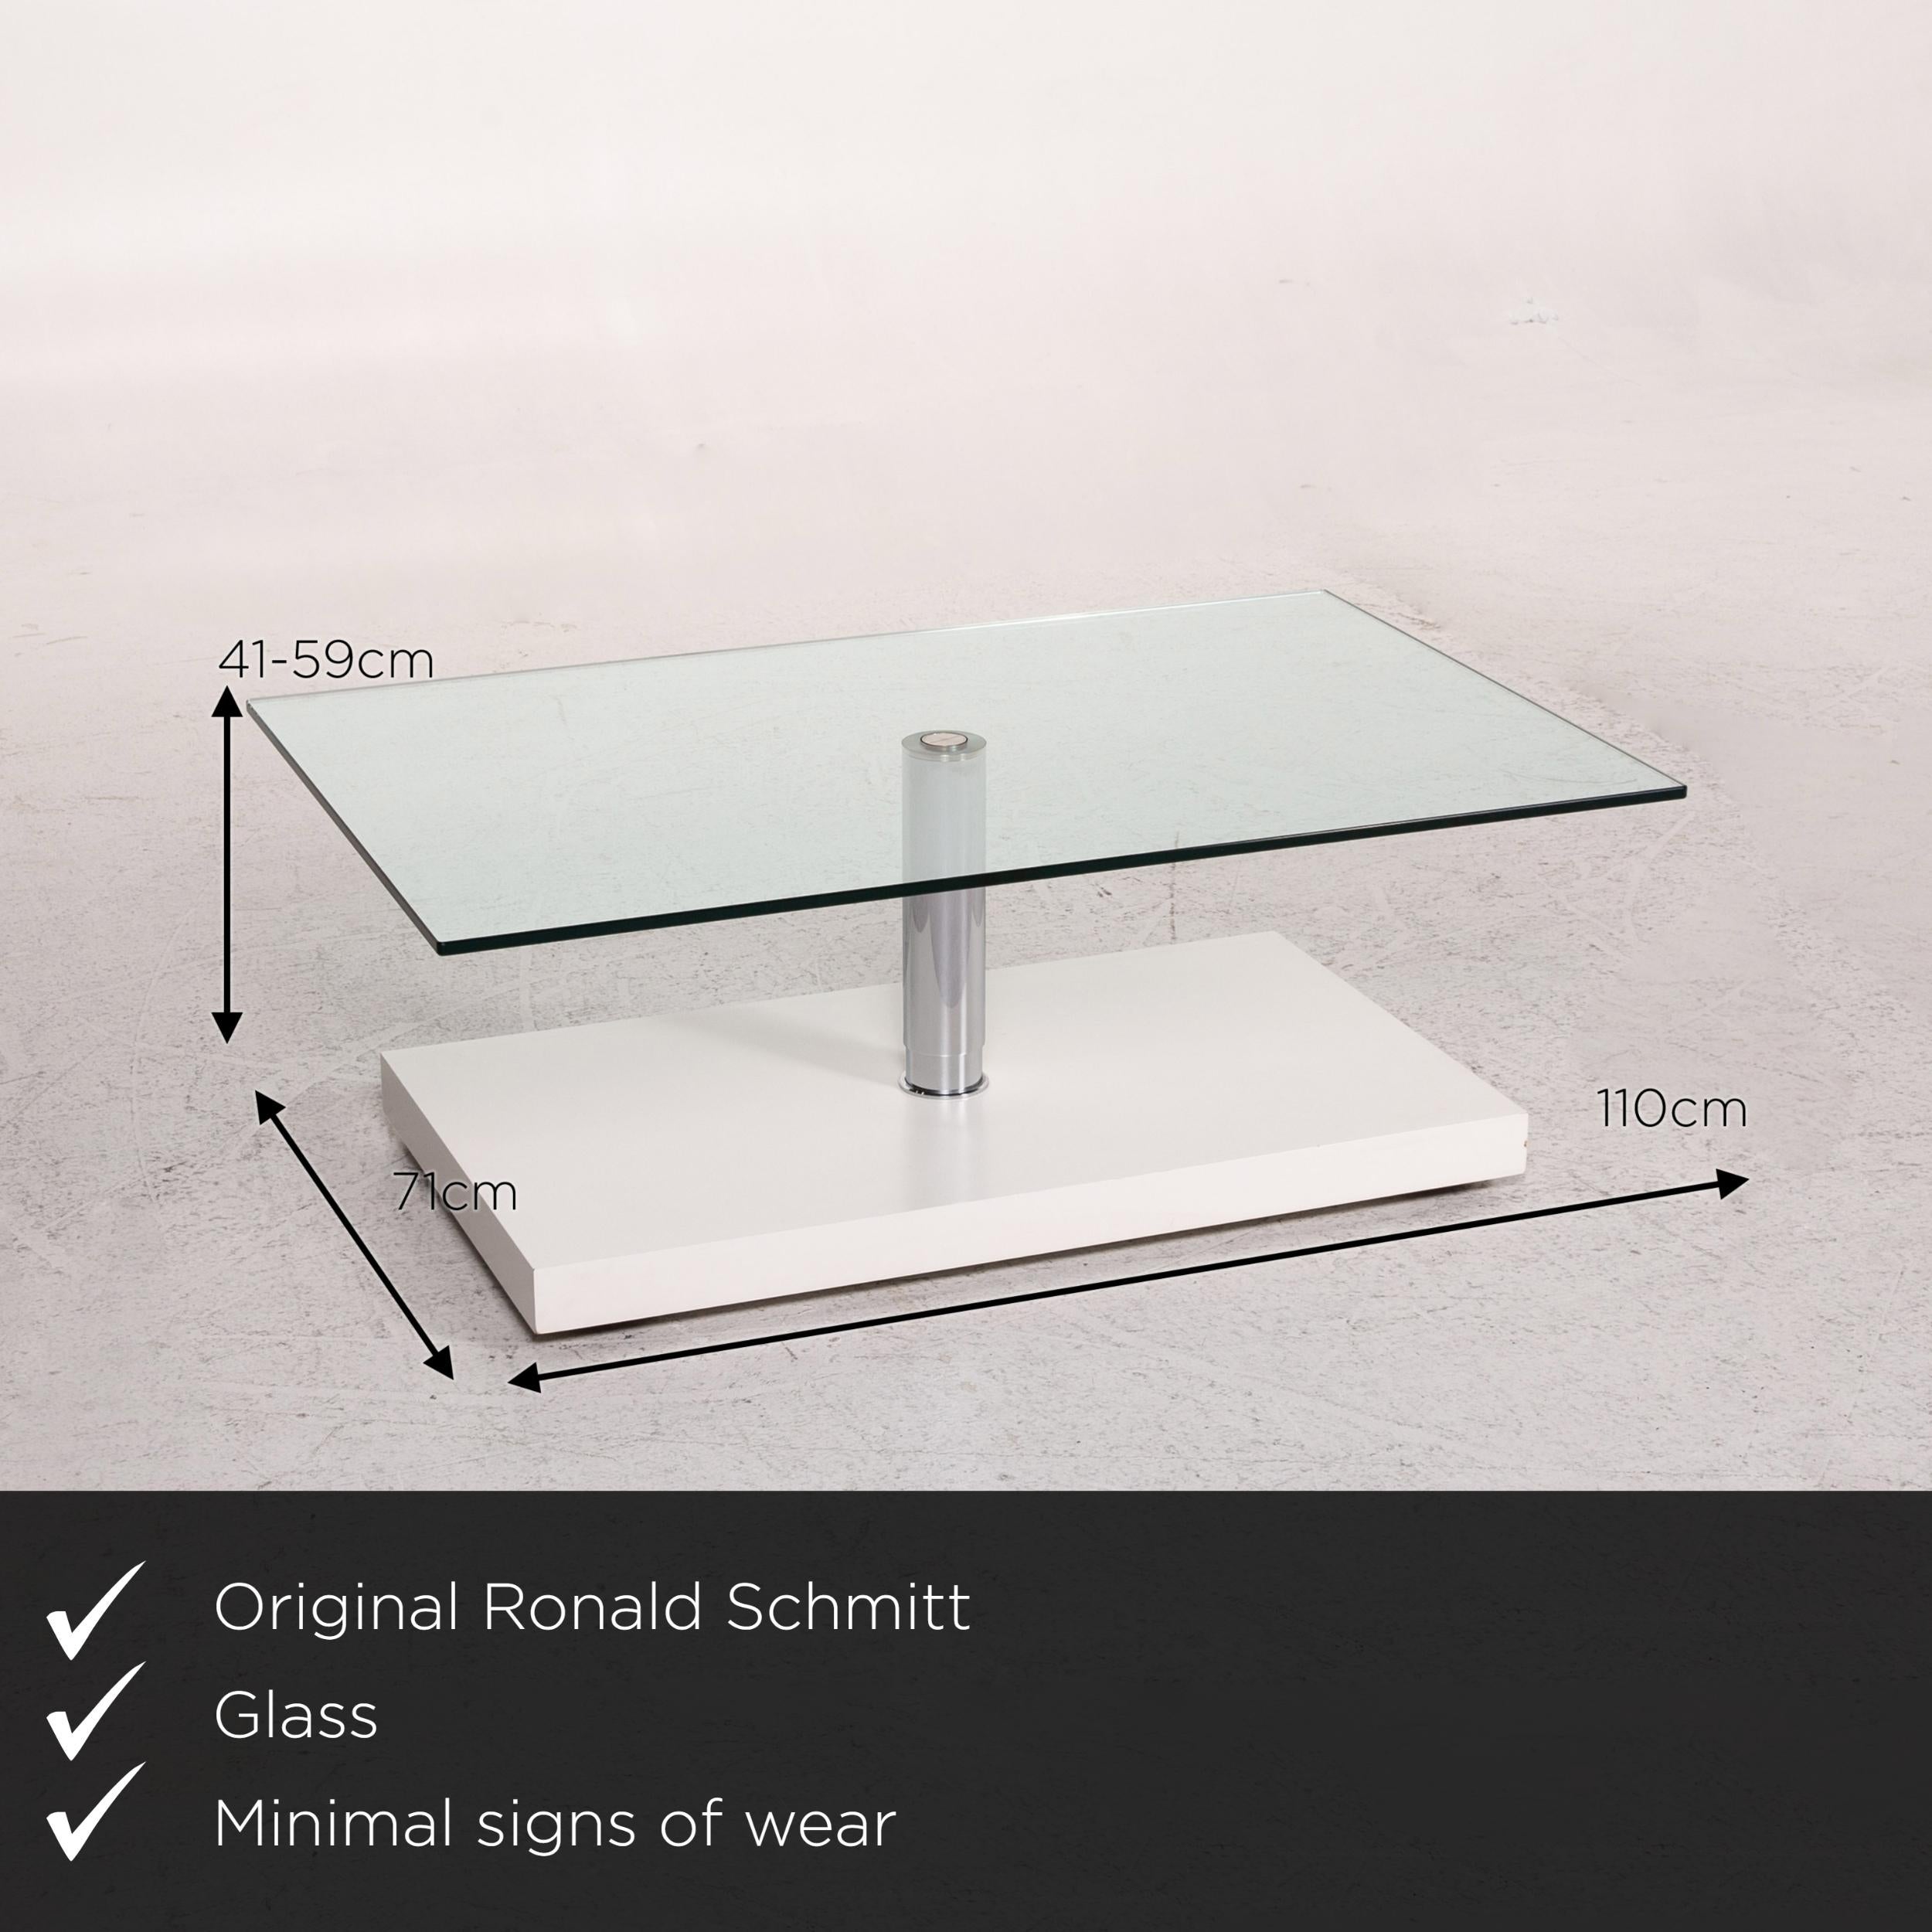 We present to you a Ronald Schmitt K 436 glass coffee table white table.

 

 Product measurements in centimeters:
 

 Depth 71
Width 110
Height 41.




     